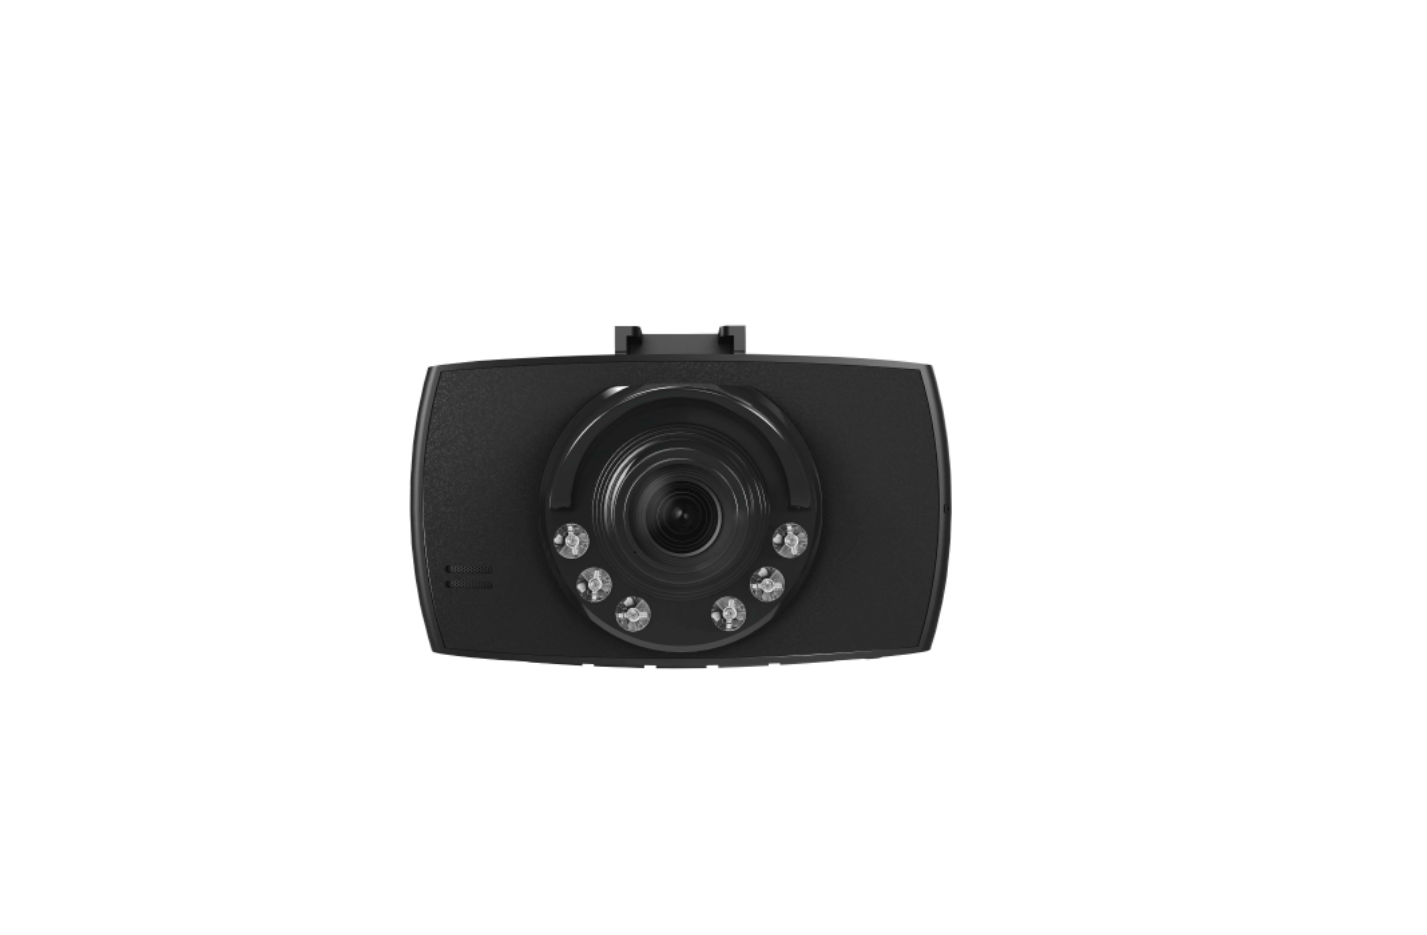 Hama 30 Dashcam with Wide-Angle Lens Car Camera User Manual - Featured image